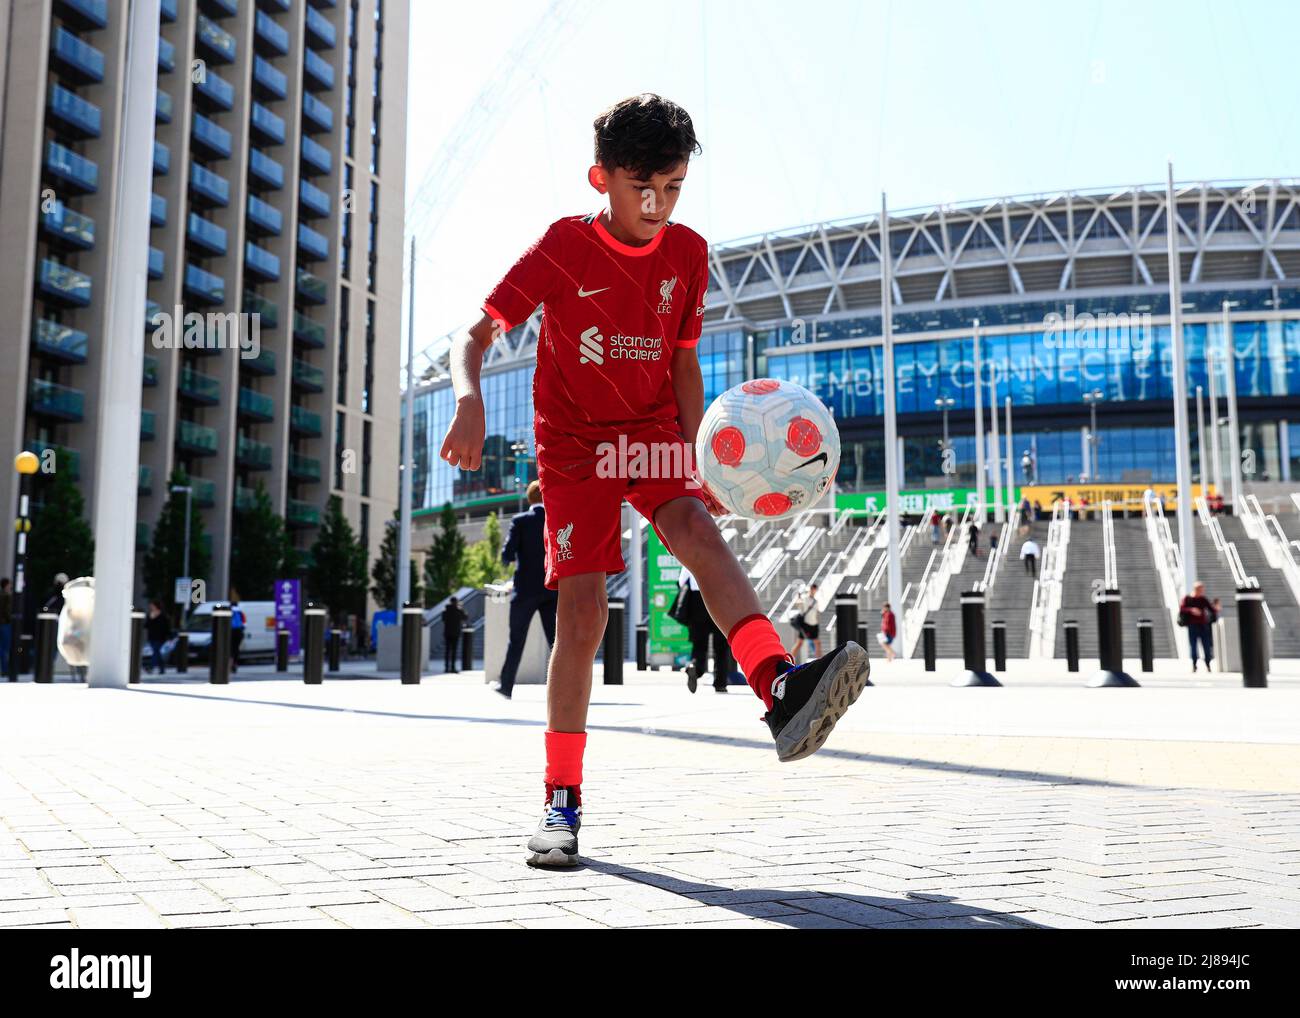 14th May 2022 ; Wembley Stadium, London England; FA Cup Final, Chelsea versus Liverpool: Young Liverpool fan doing Keepie uppie's outside Wembley Stadium Stock Photo